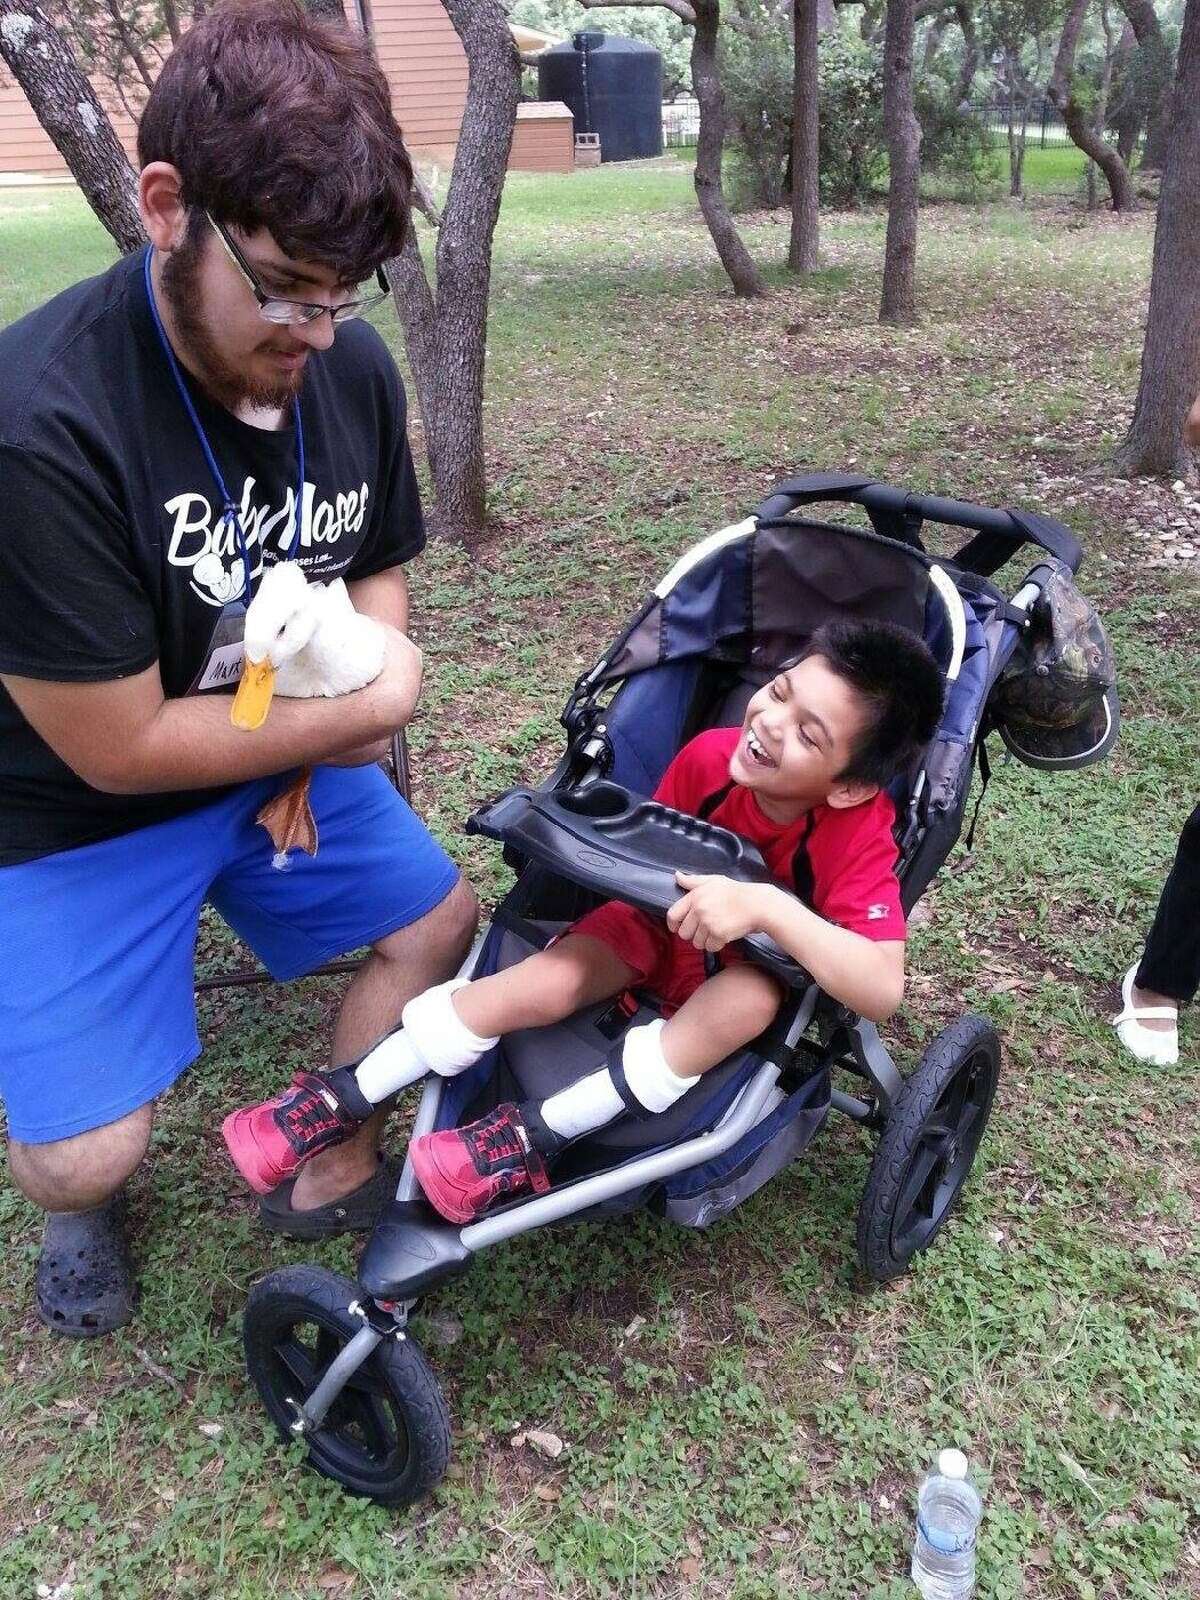 Mark Andrade, 19, shows Daffy the Duck to Abel Garcia, 8, at the Eagles Flight Advocacy and Outreach summer program in Boerne.